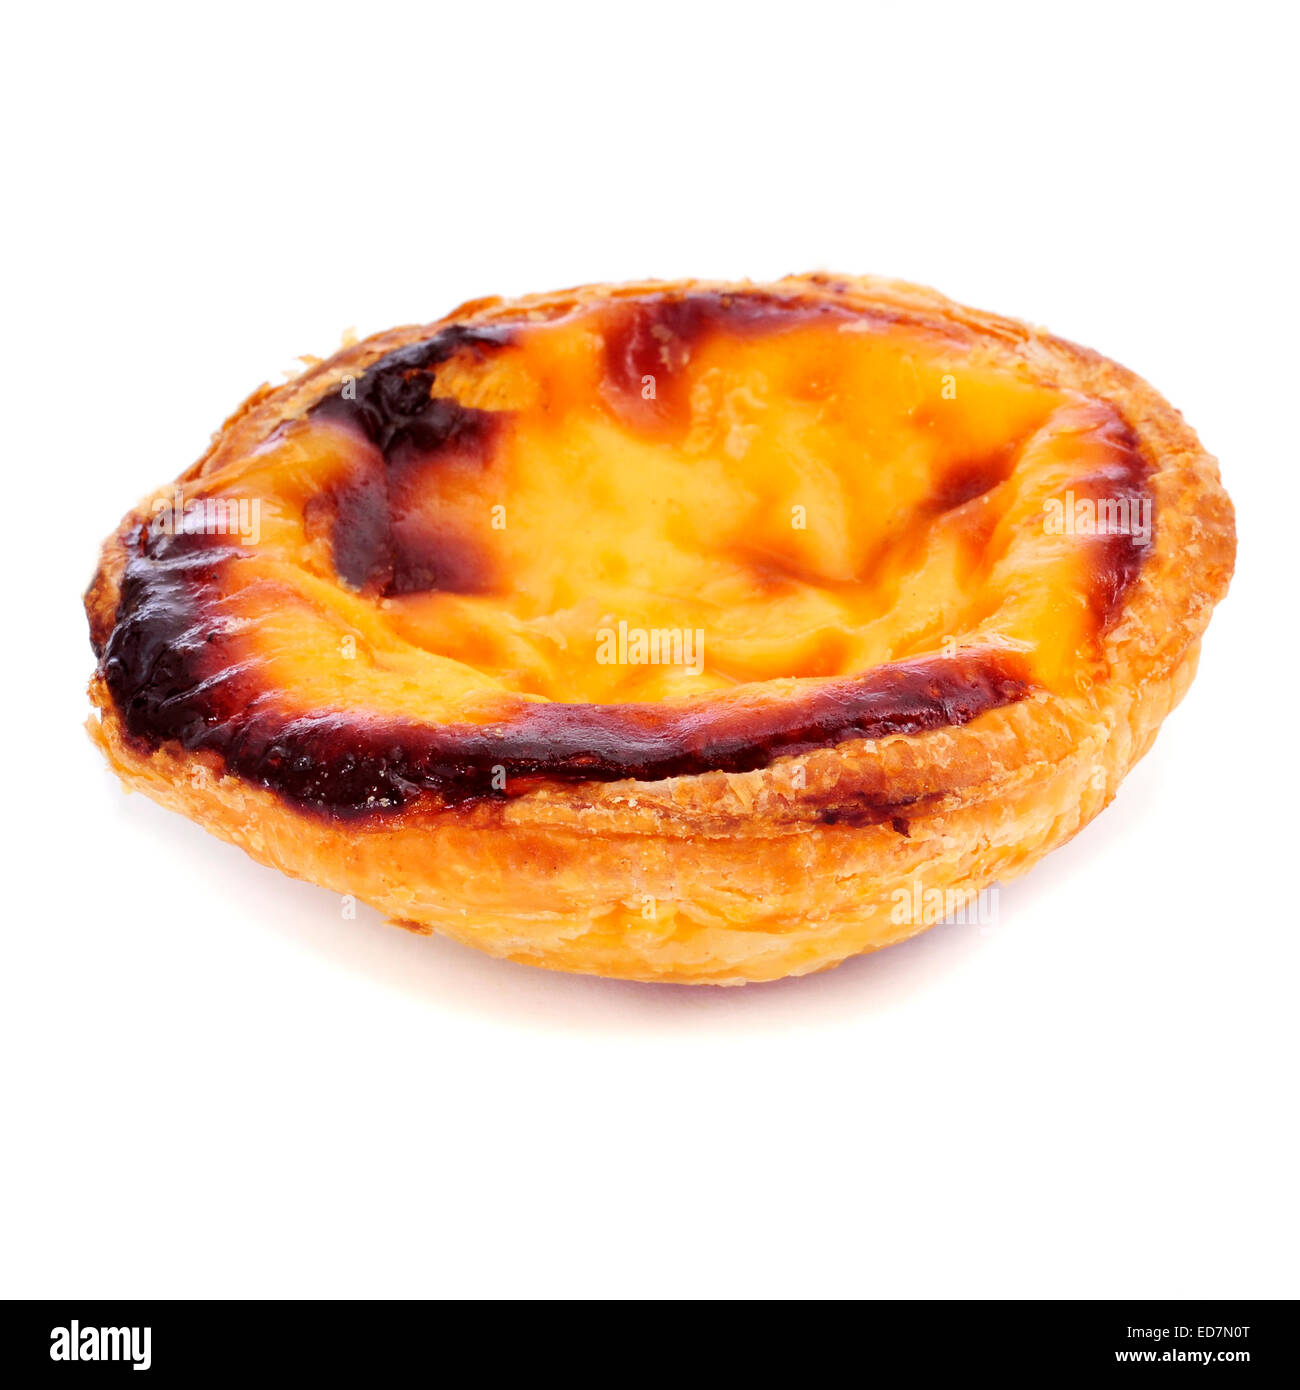 a pastel de nata, typical Portuguese egg tart pastry, on a white background Stock Photo